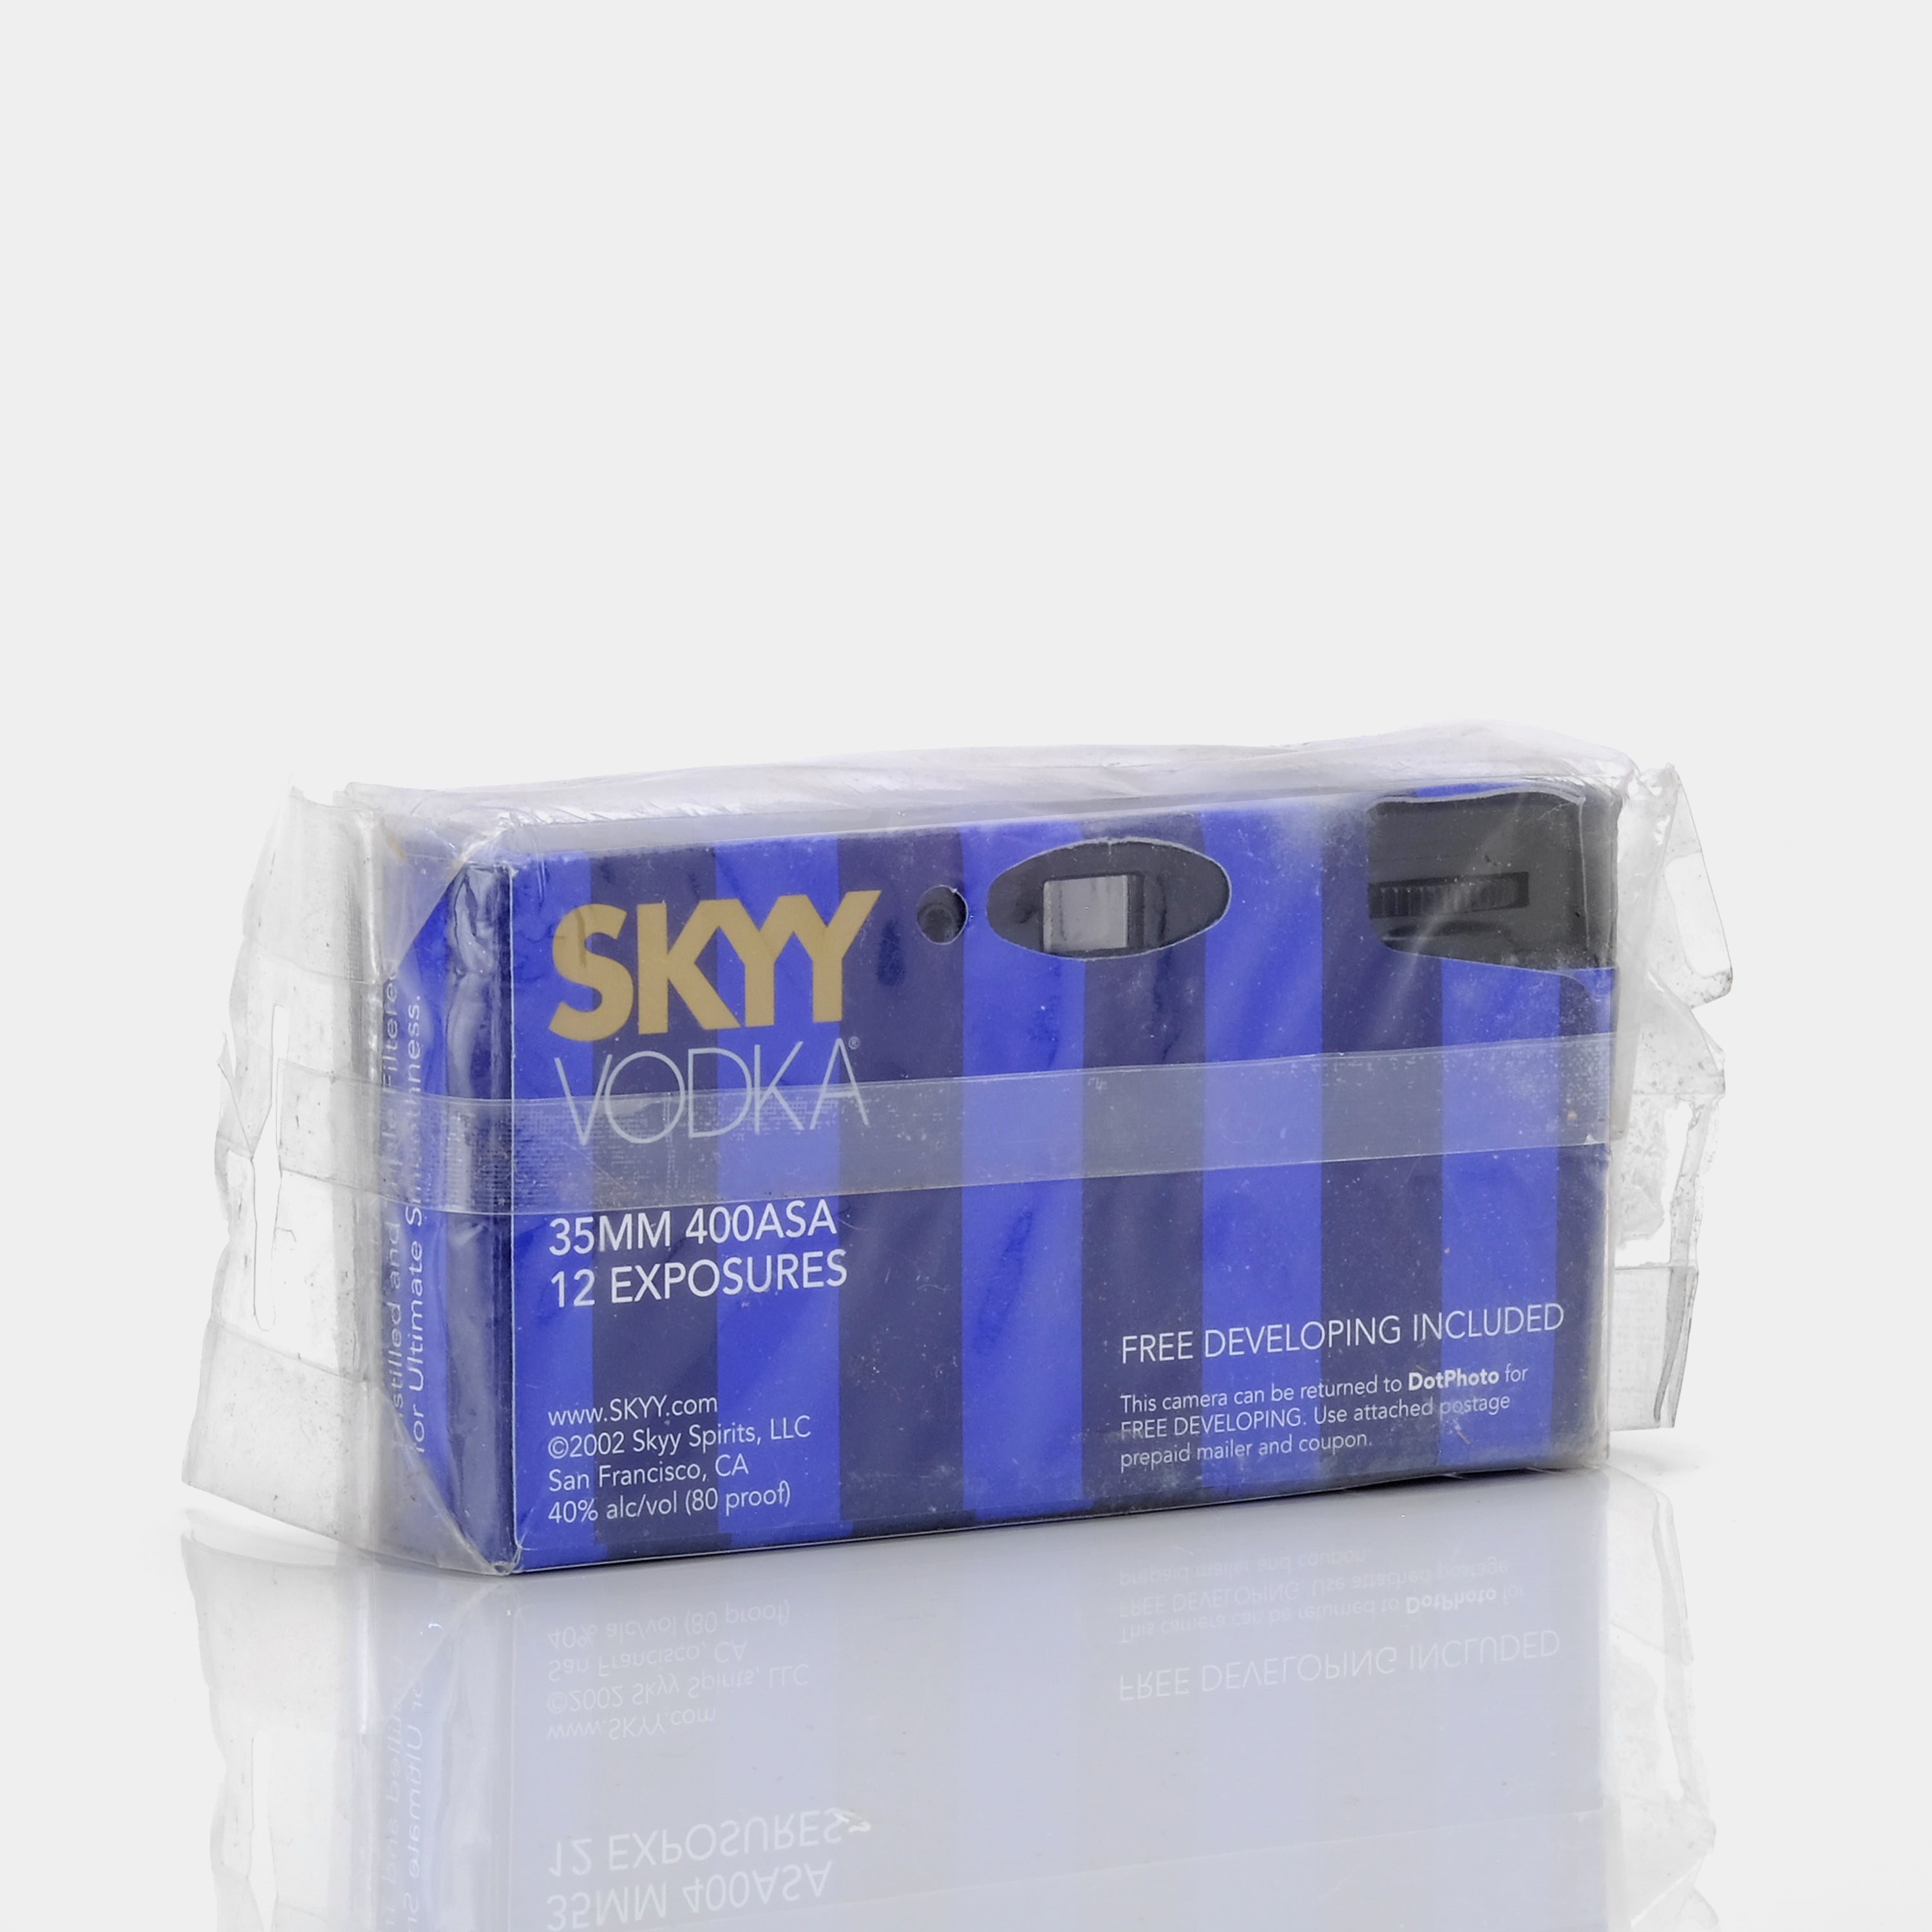 Vintage Promotional Skyy Vodka Great Martini Moments Disposable 35mm Film Camera